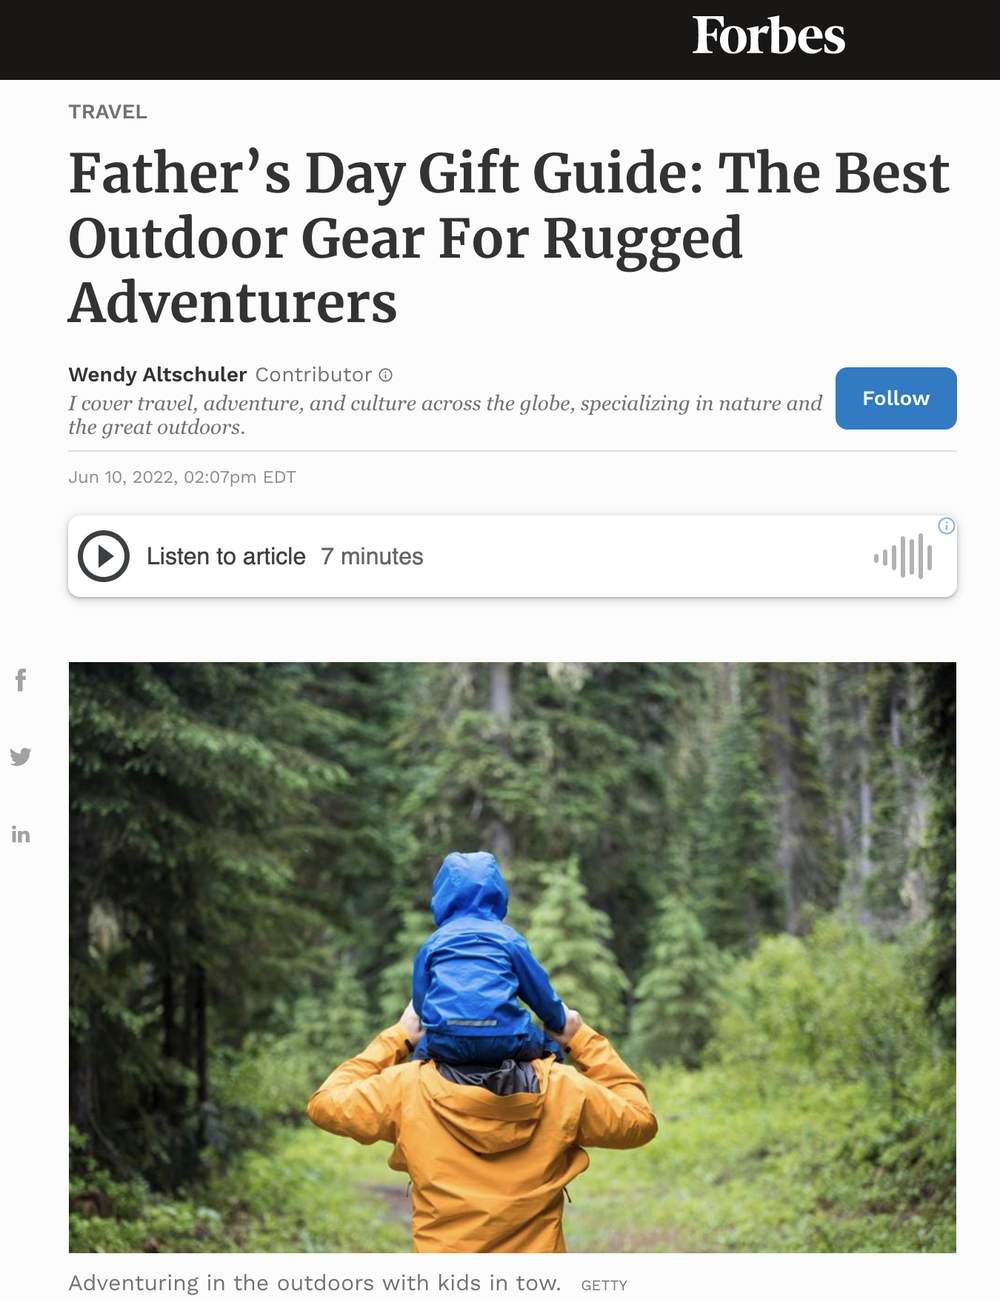 Father’s Day Gift Guide: The Best Outdoor Gear For Rugged Adventurers